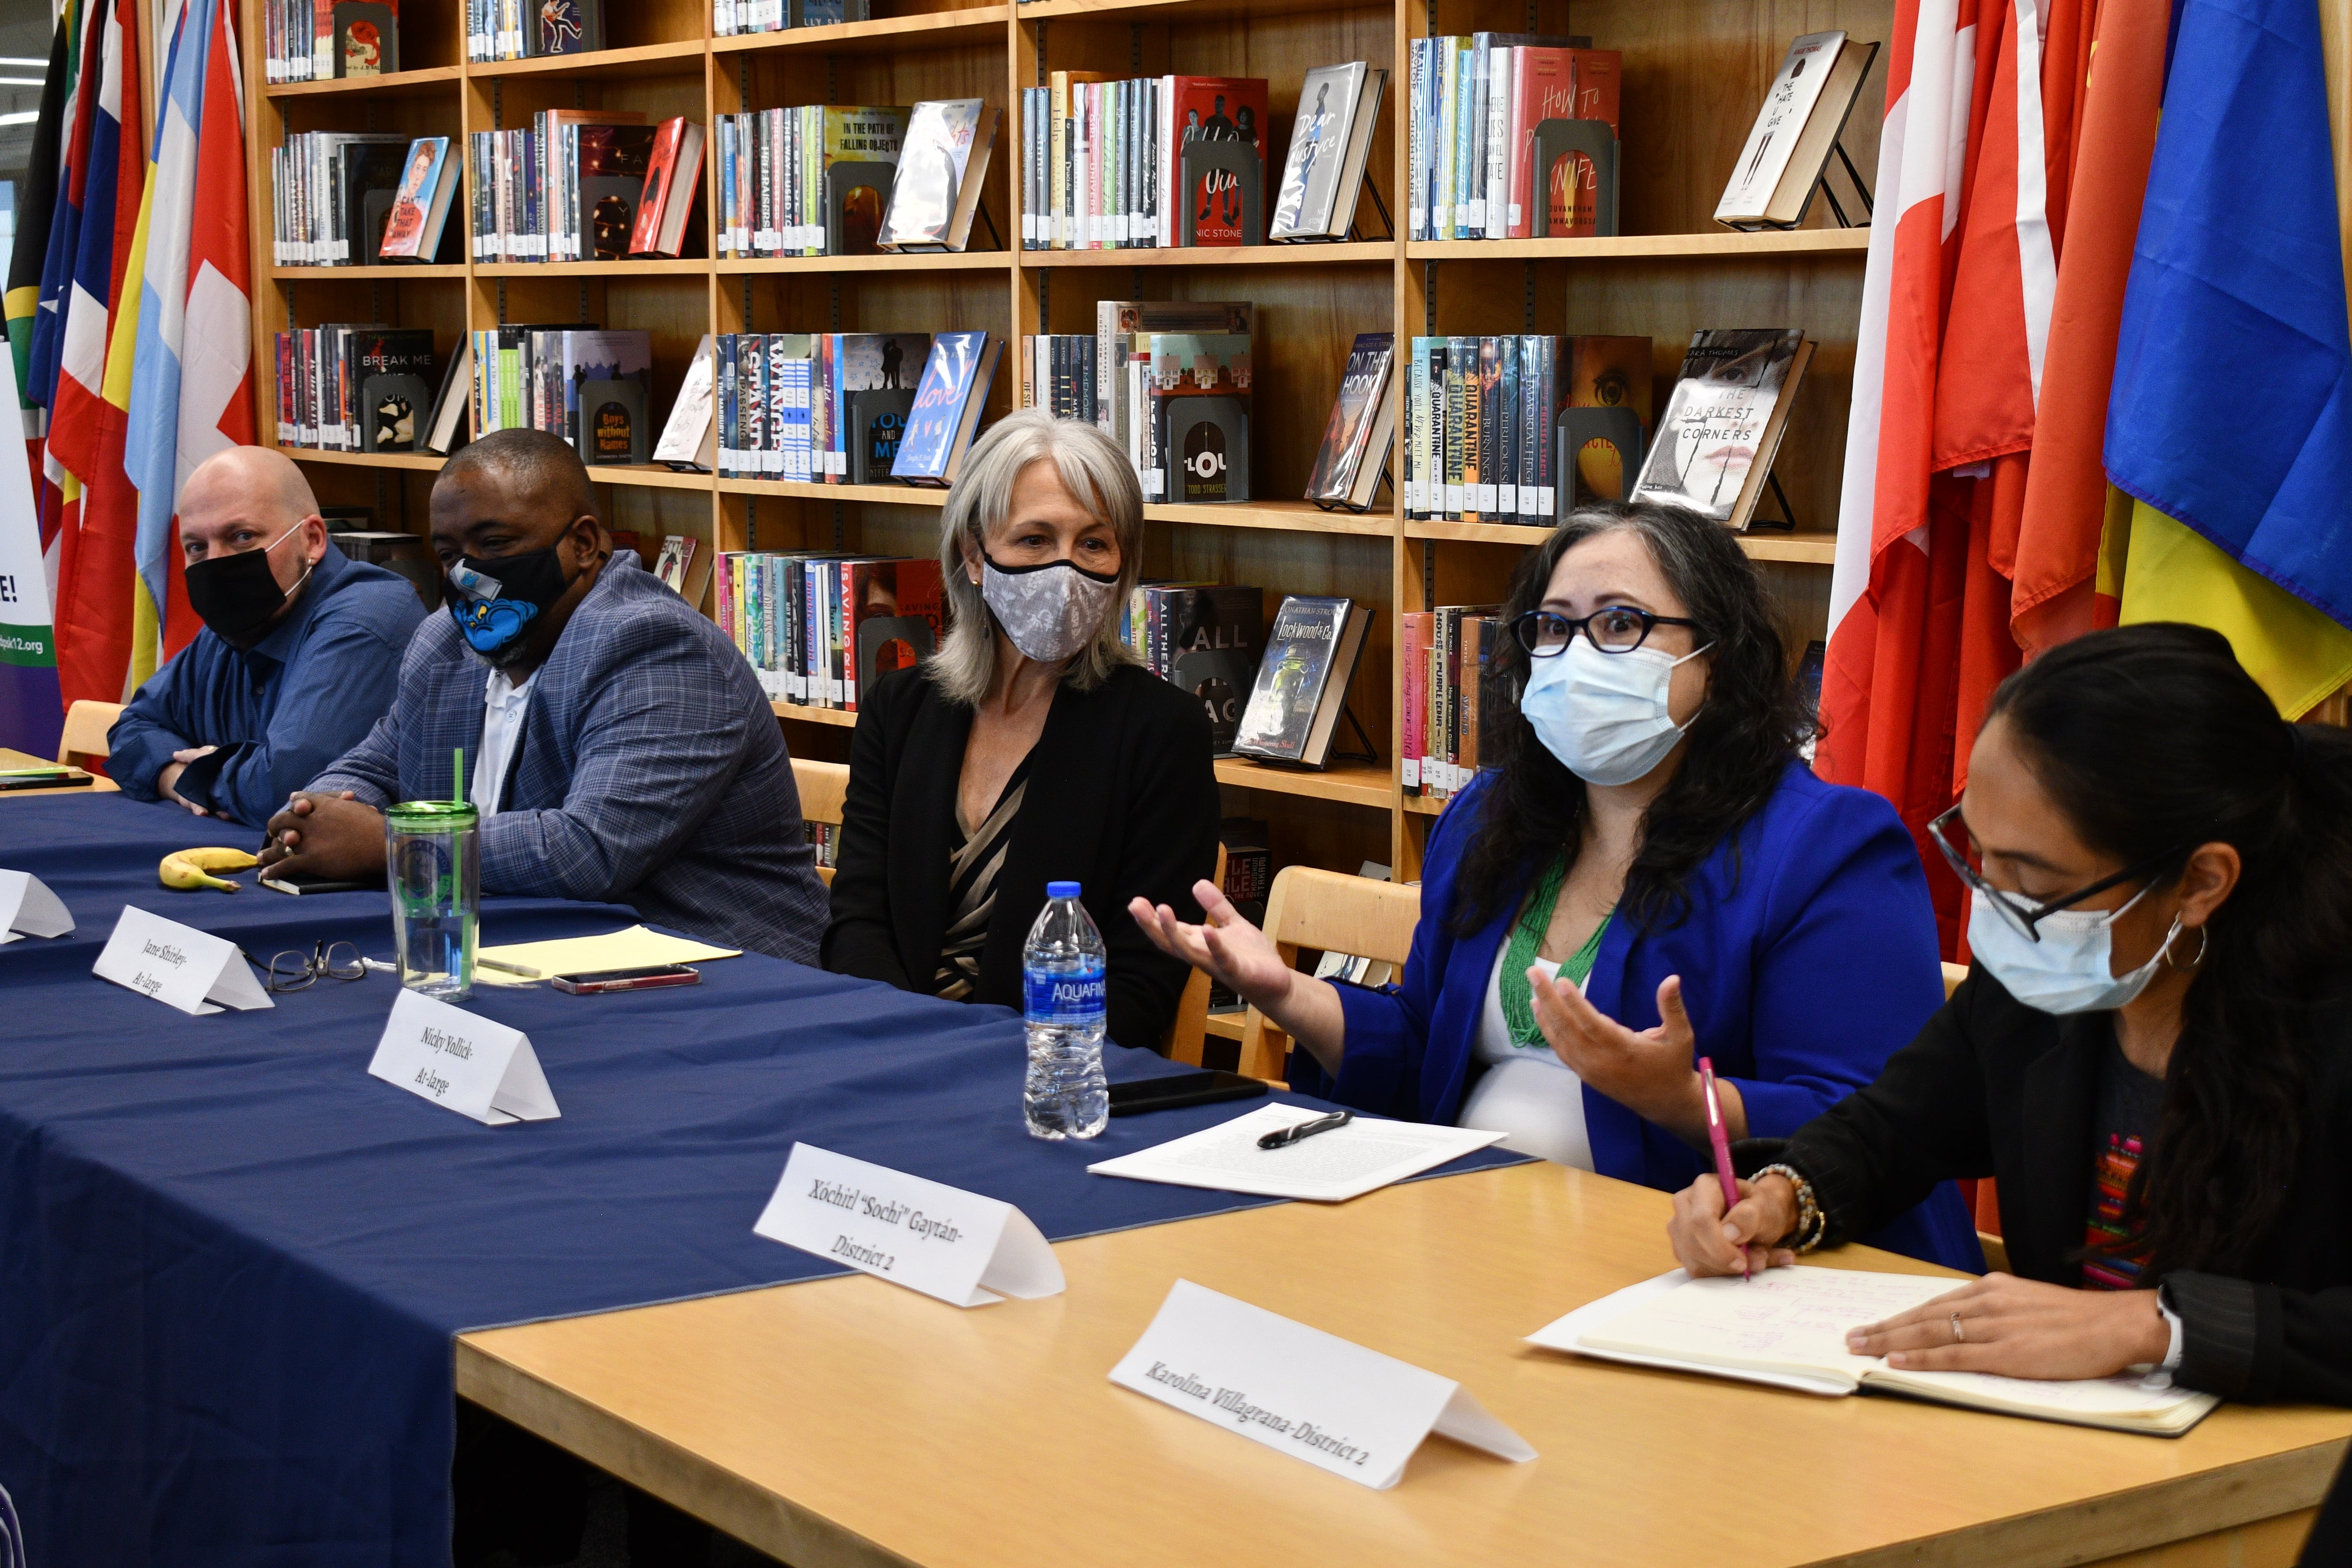 Five Denver school board candidates sit at a table in a high school library during a candidate forum. The candidates are wearing masks.